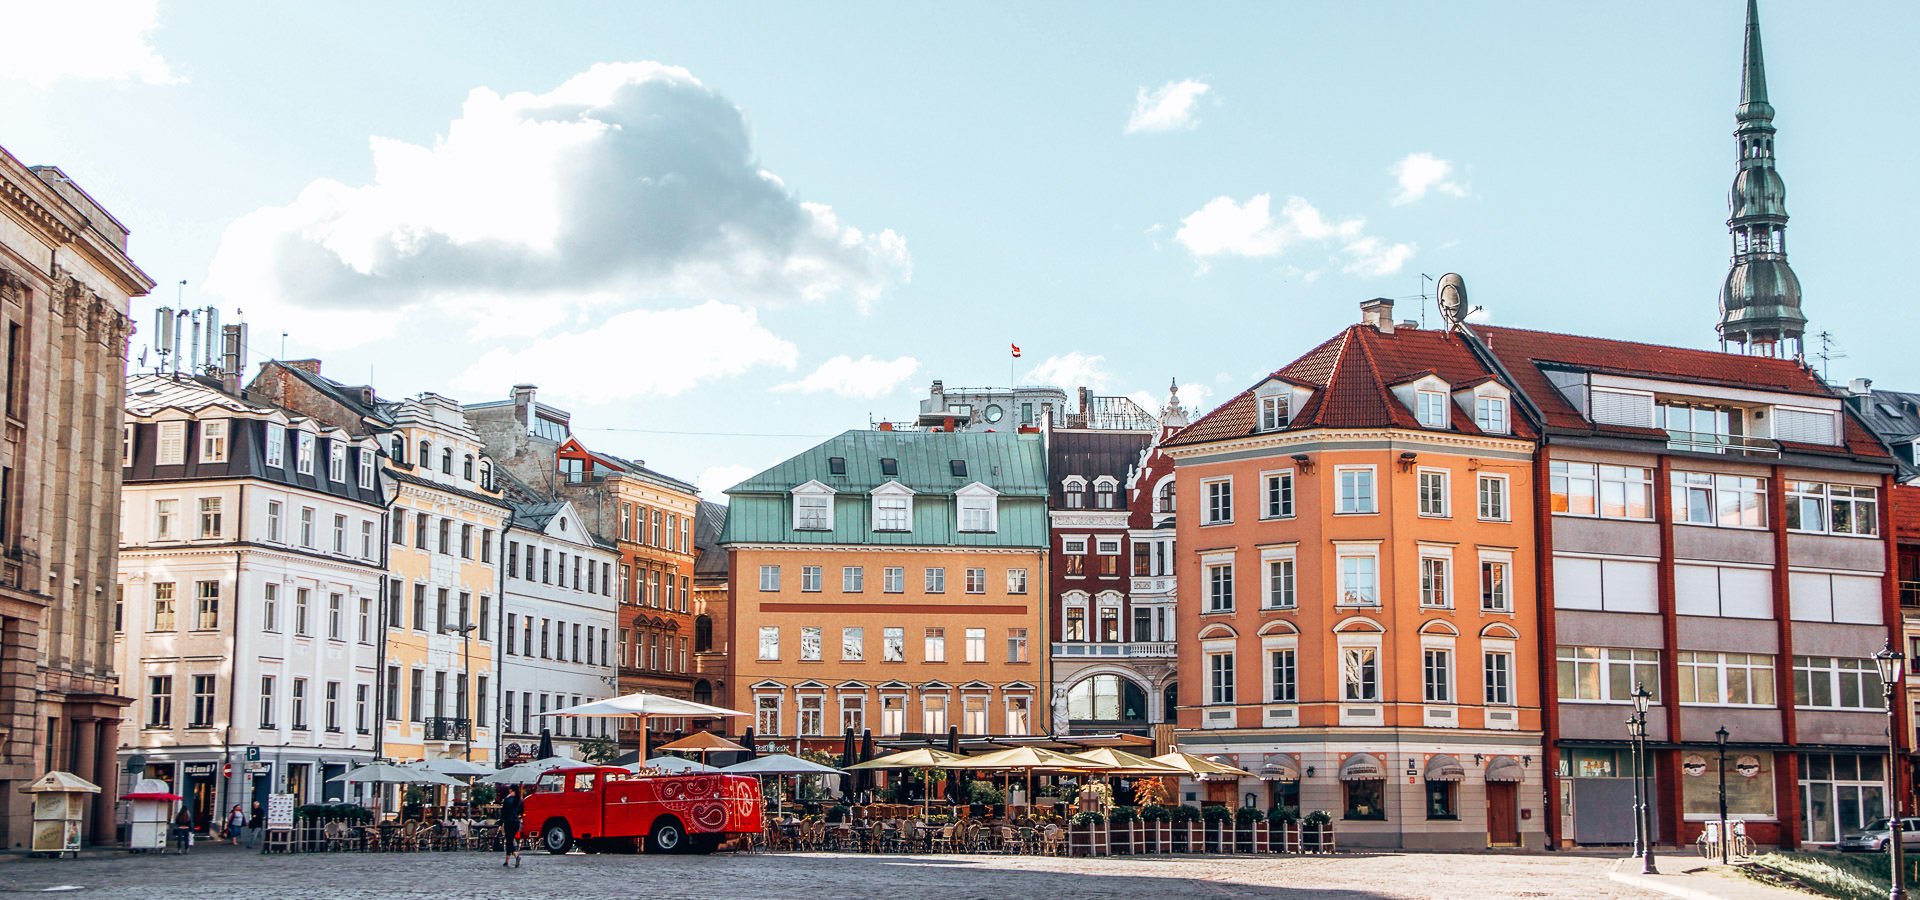 A Fabulous Guide To One Day In Riga Latvia | One Day in Riga Latvia 2